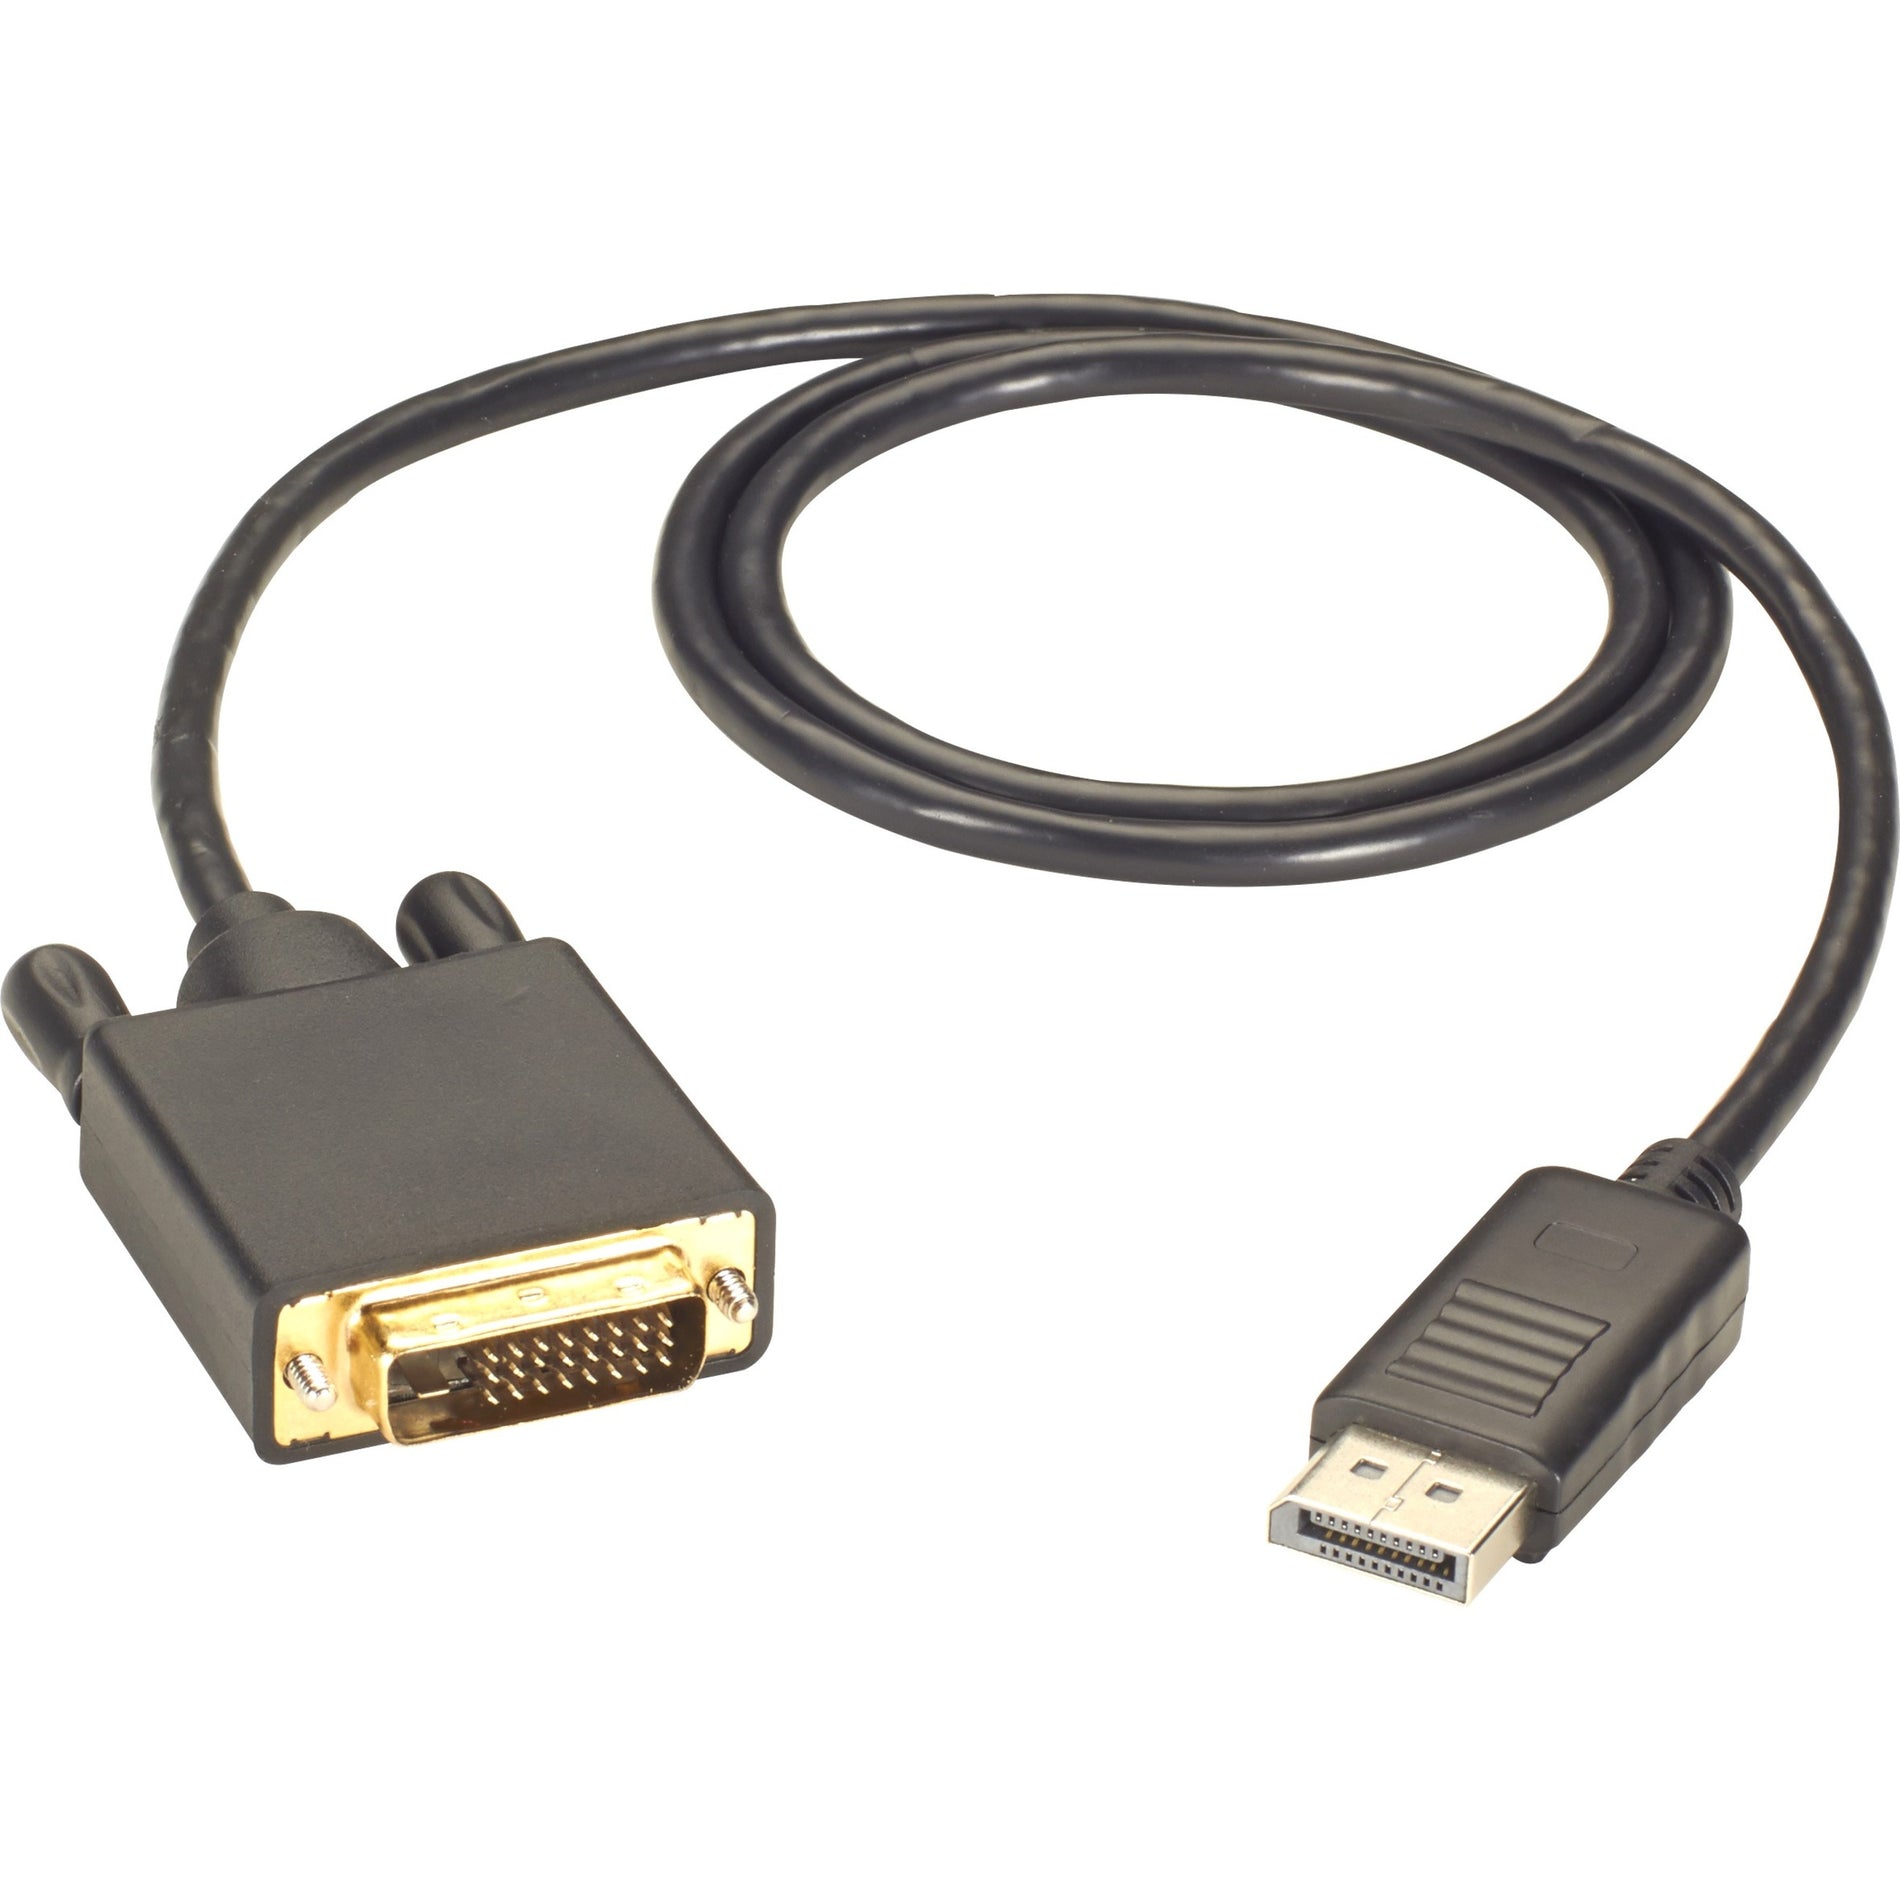 Black Box EVNDPDVI-0003-MM DisplayPort to DVI Cable - Male to Male, 3-ft. Plug & Play, 10.8 Gbit/s Data Transfer Rate, 1920 x 1080 Supported Resolution